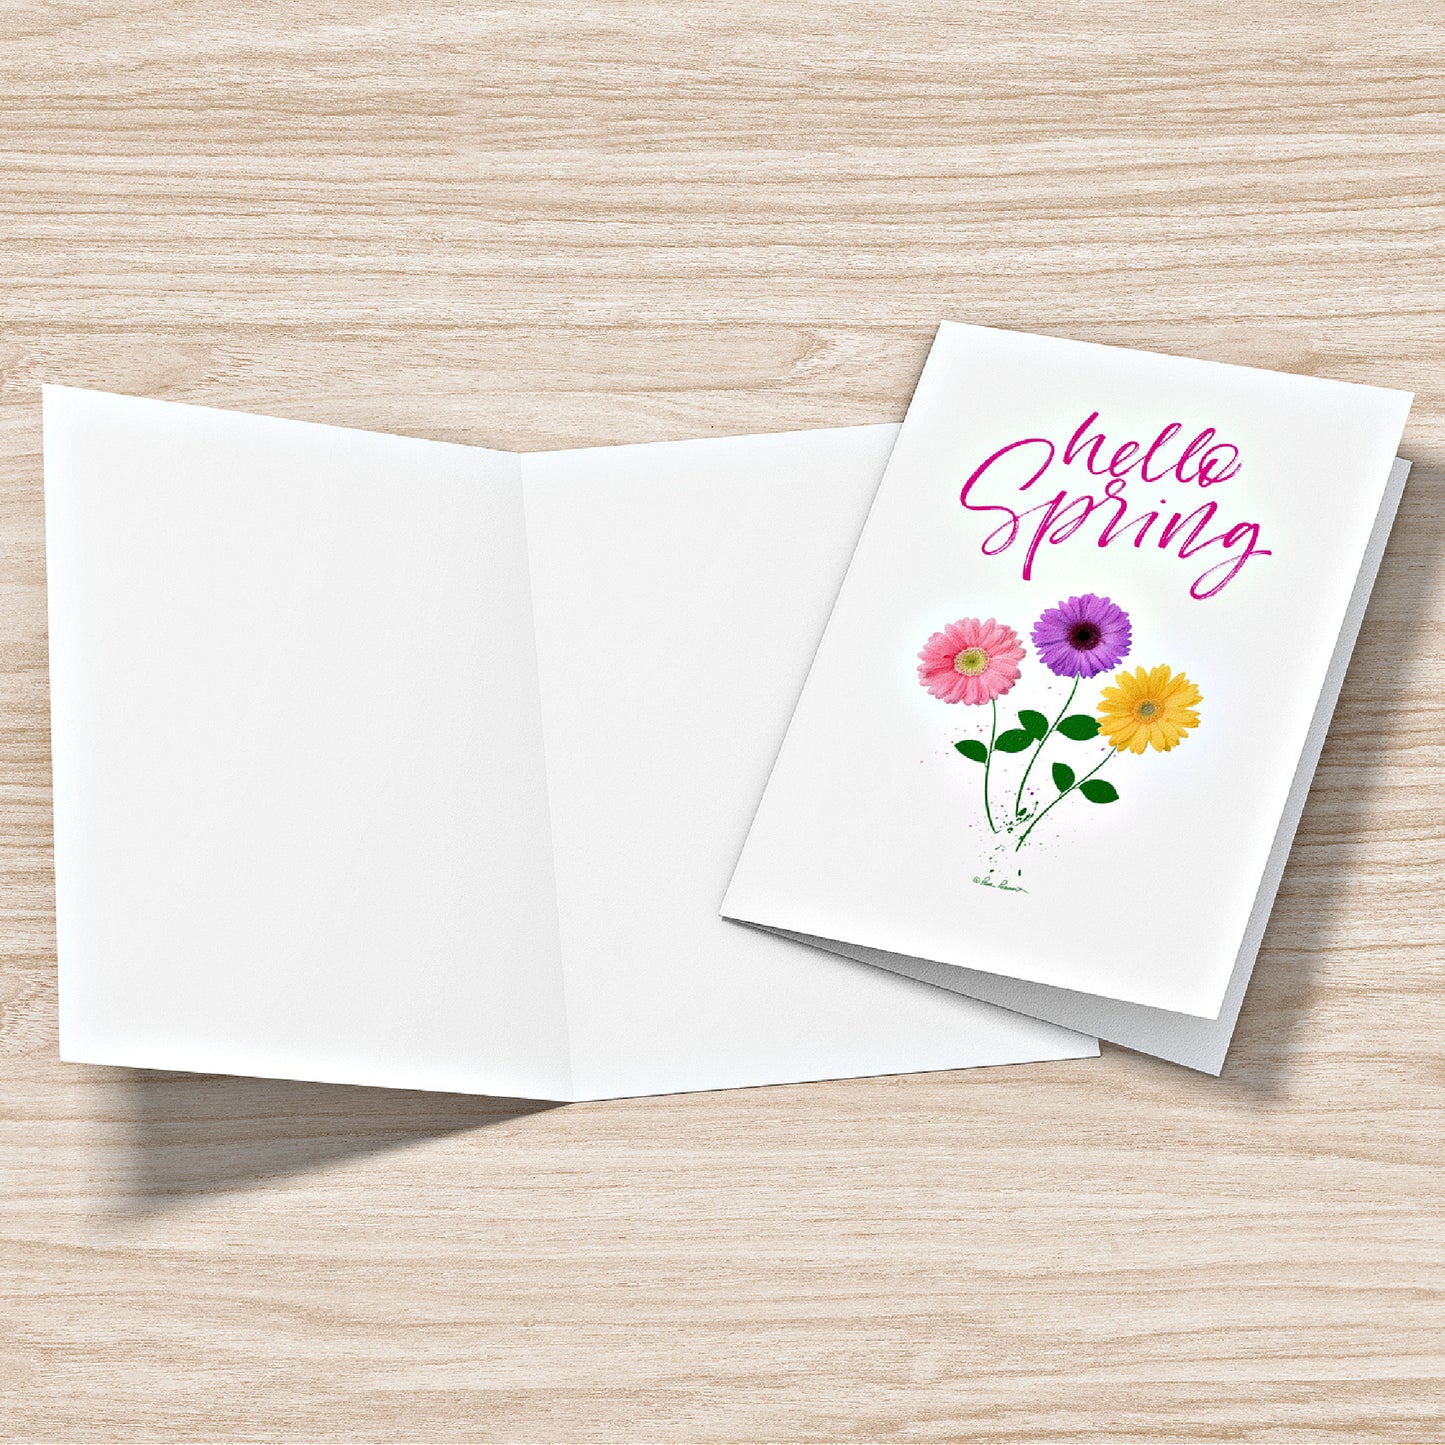 Mock up of our Hello-Spring Greeting Card; one lying open and another showing the front of the card